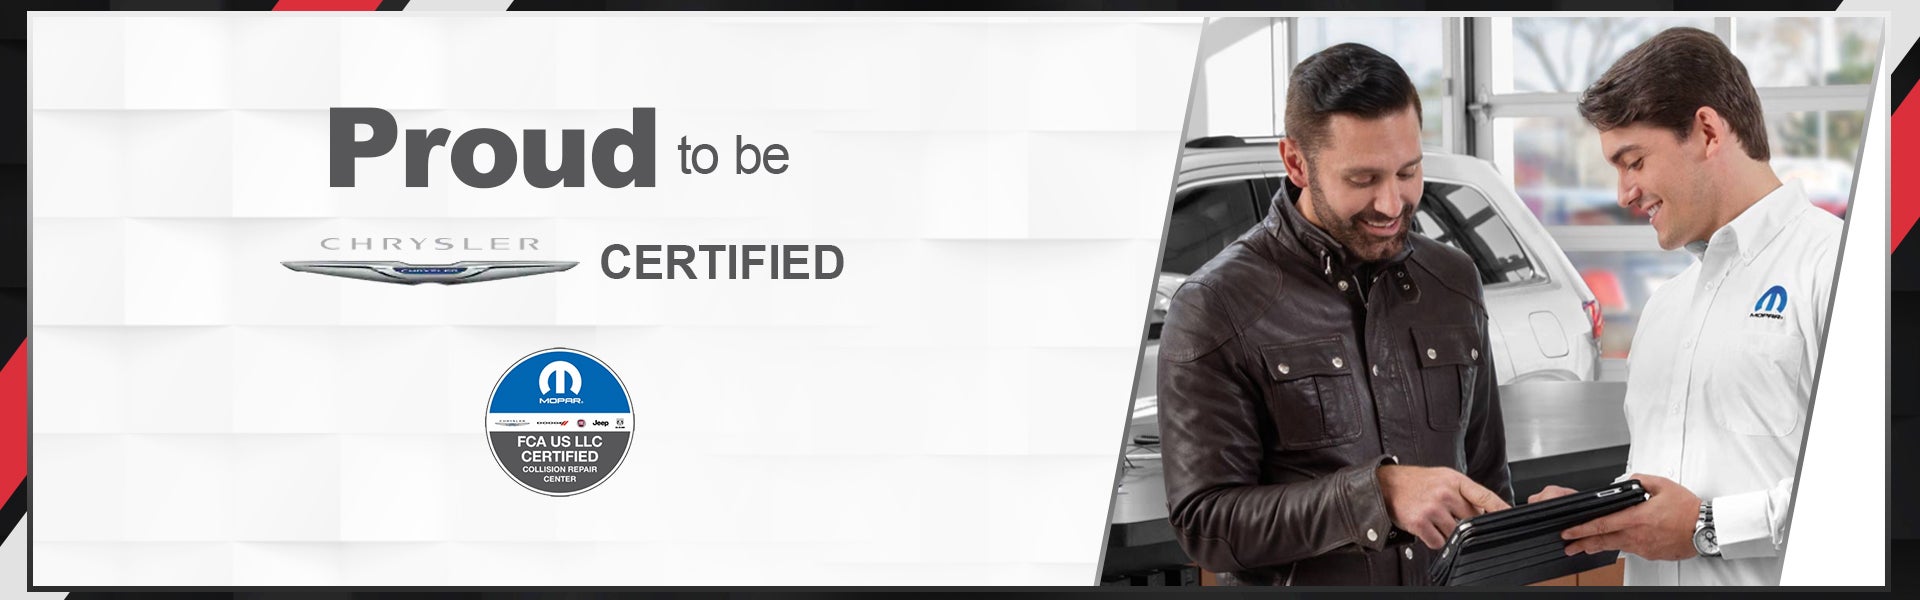 Chrysler Certified Auto Body Shop Certified Collision Repair